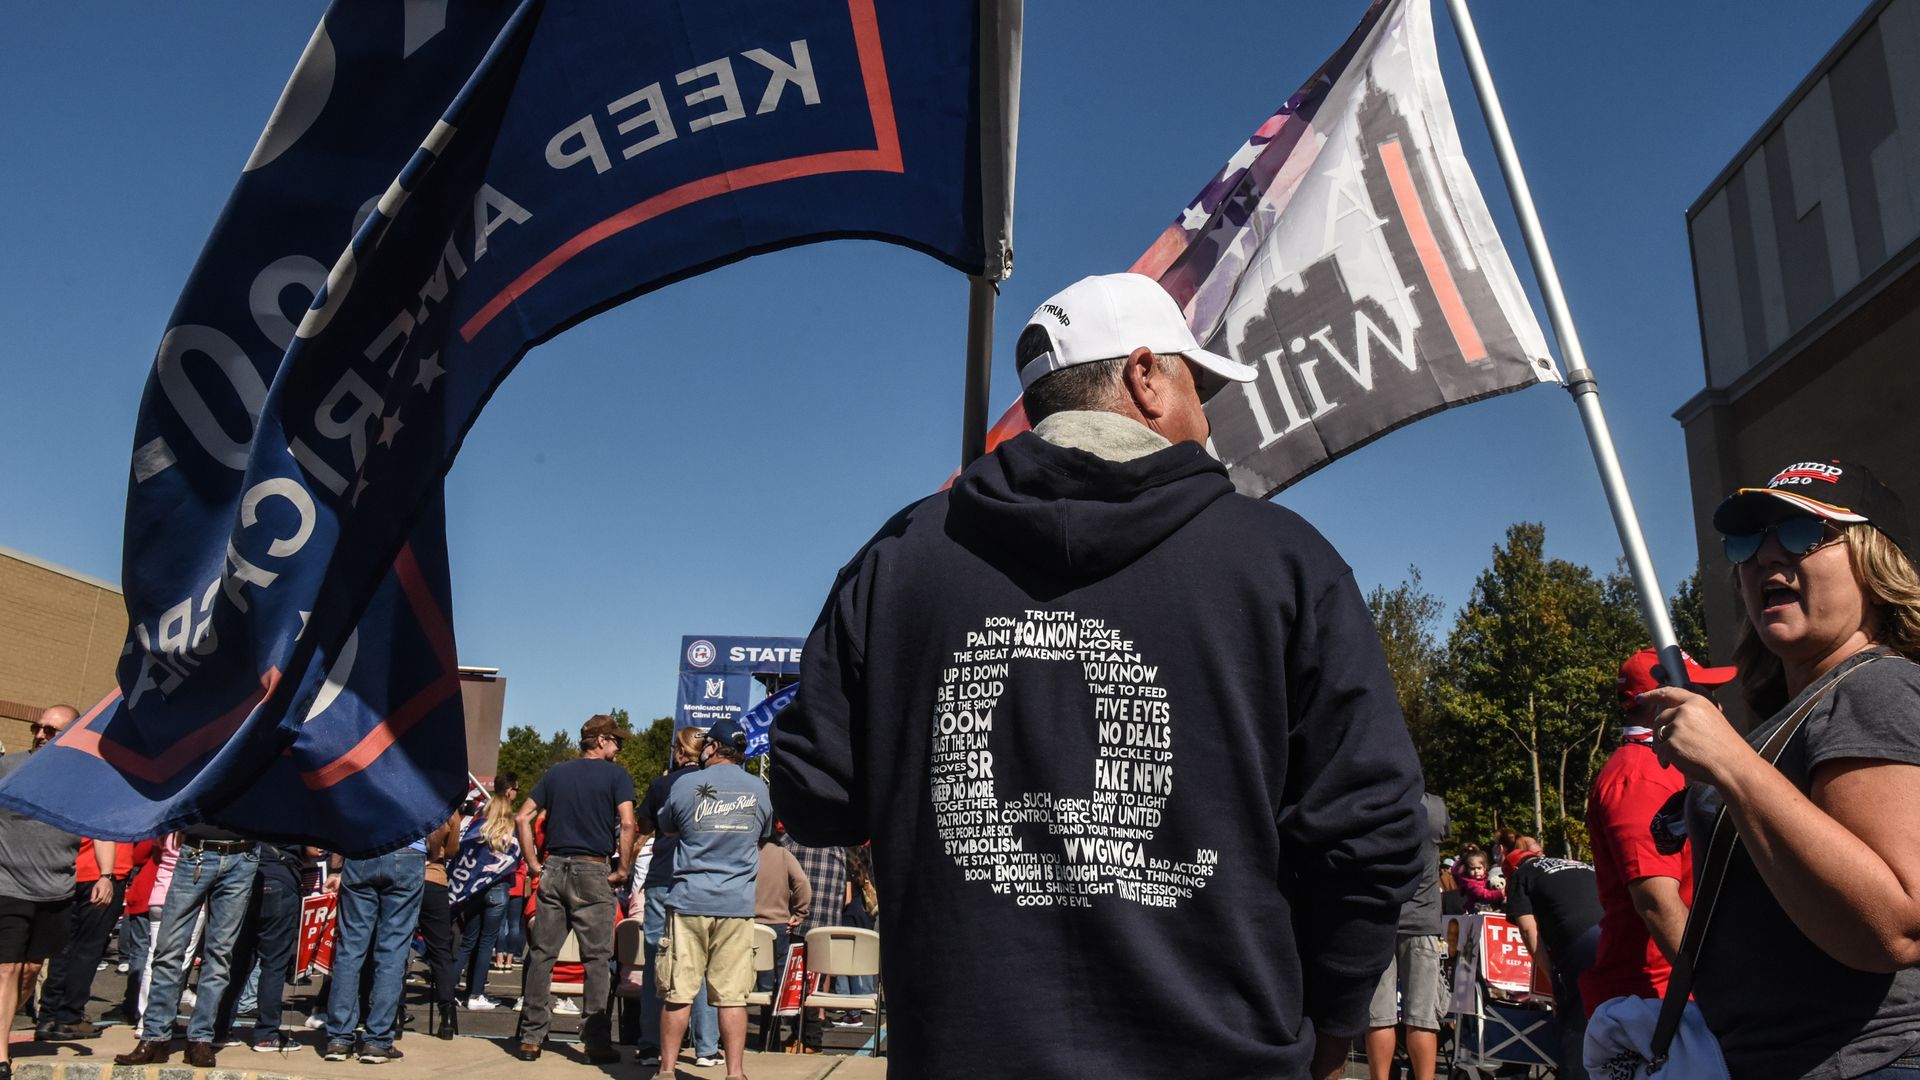 A person wearing a QAnon sweatshirt at a Trump rally in New York City on Oct. 3.